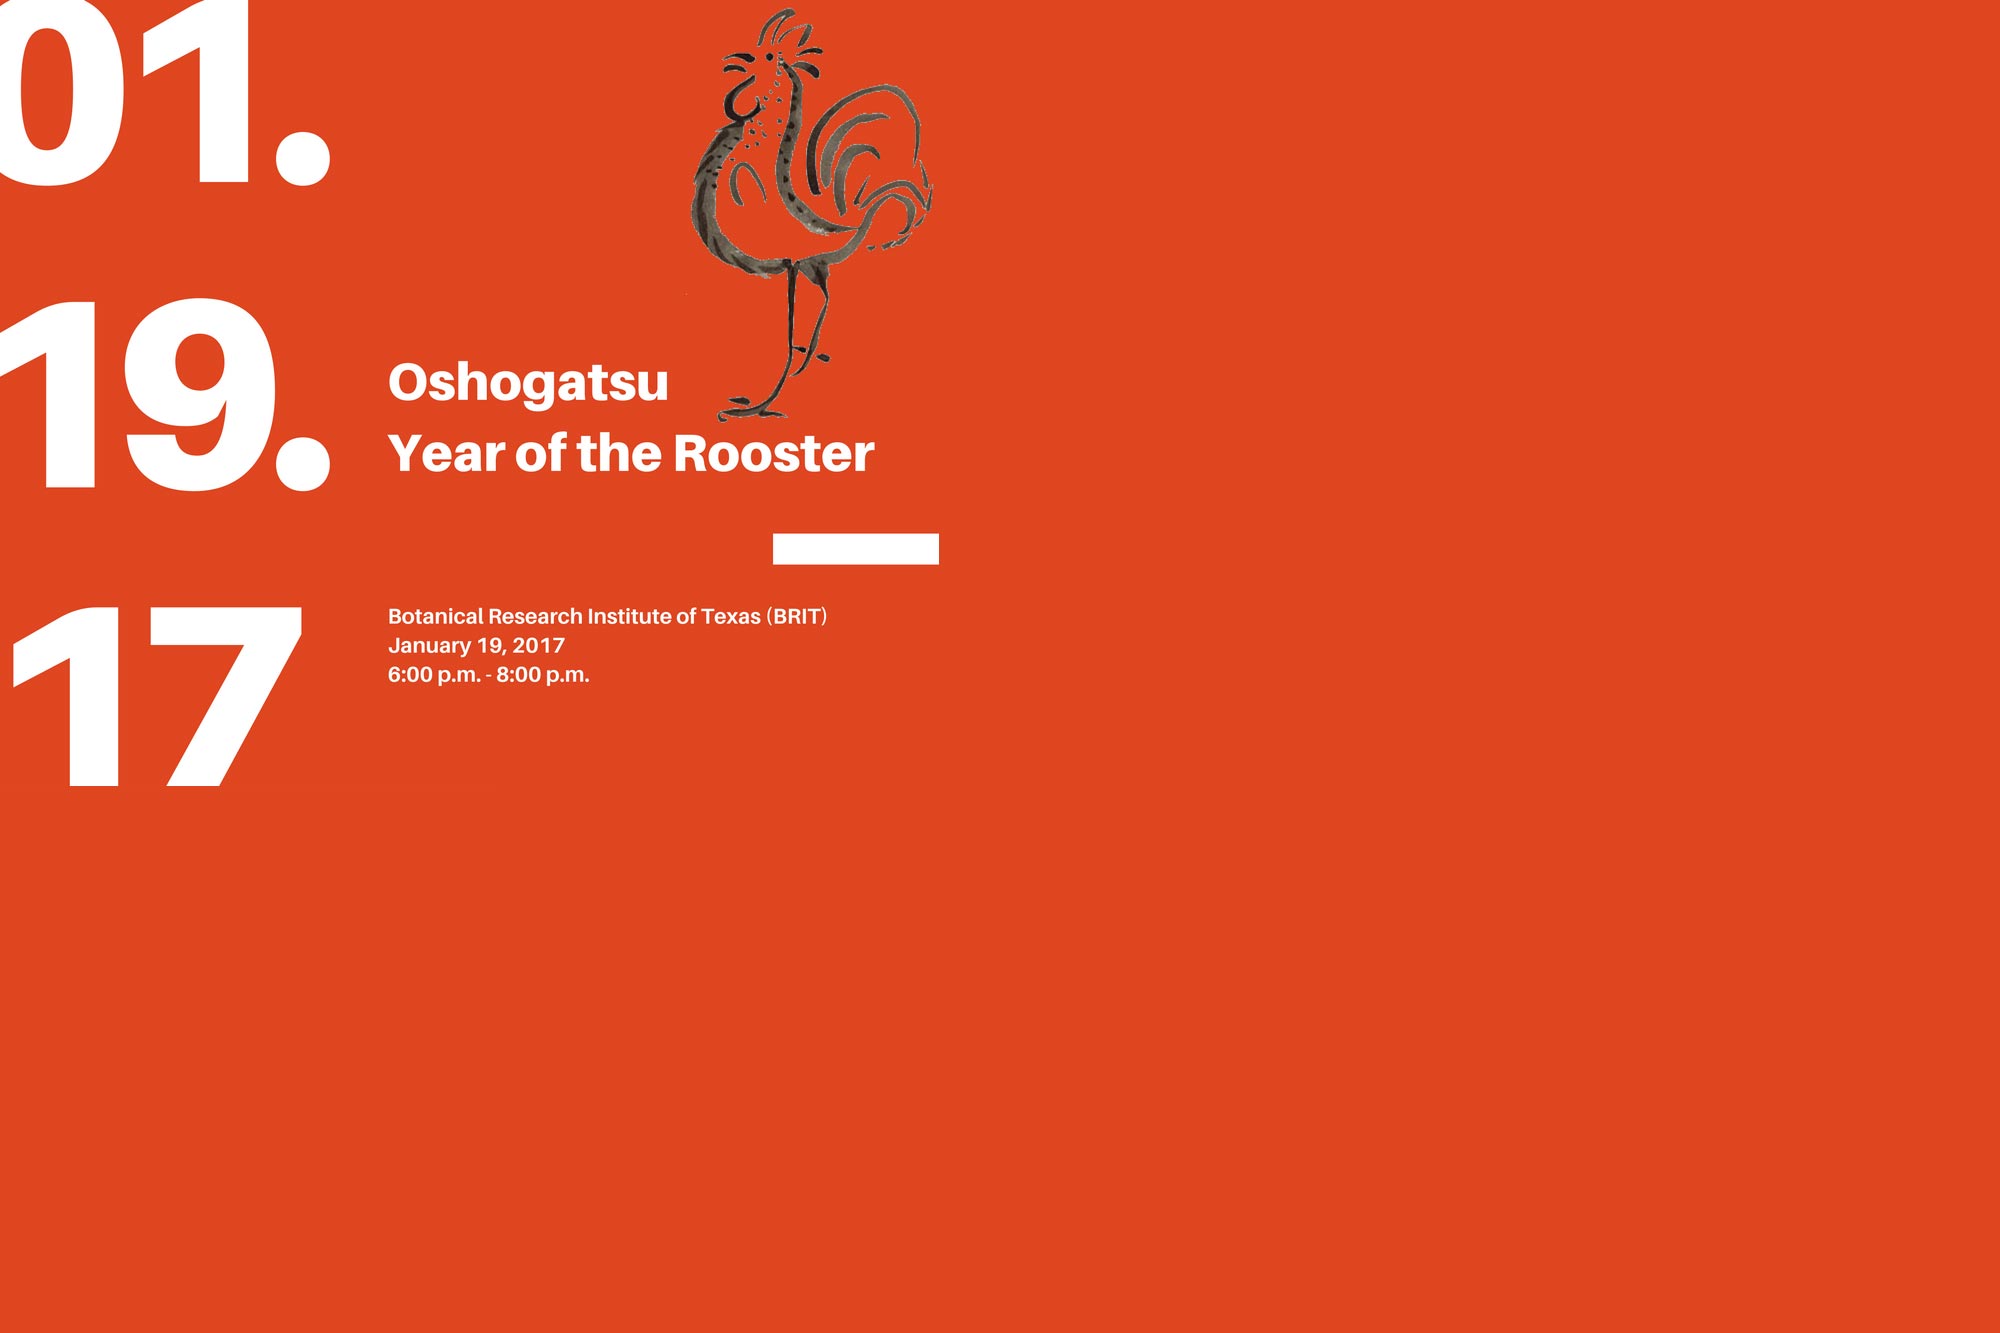 Oshogatsu: Year of the Rooster